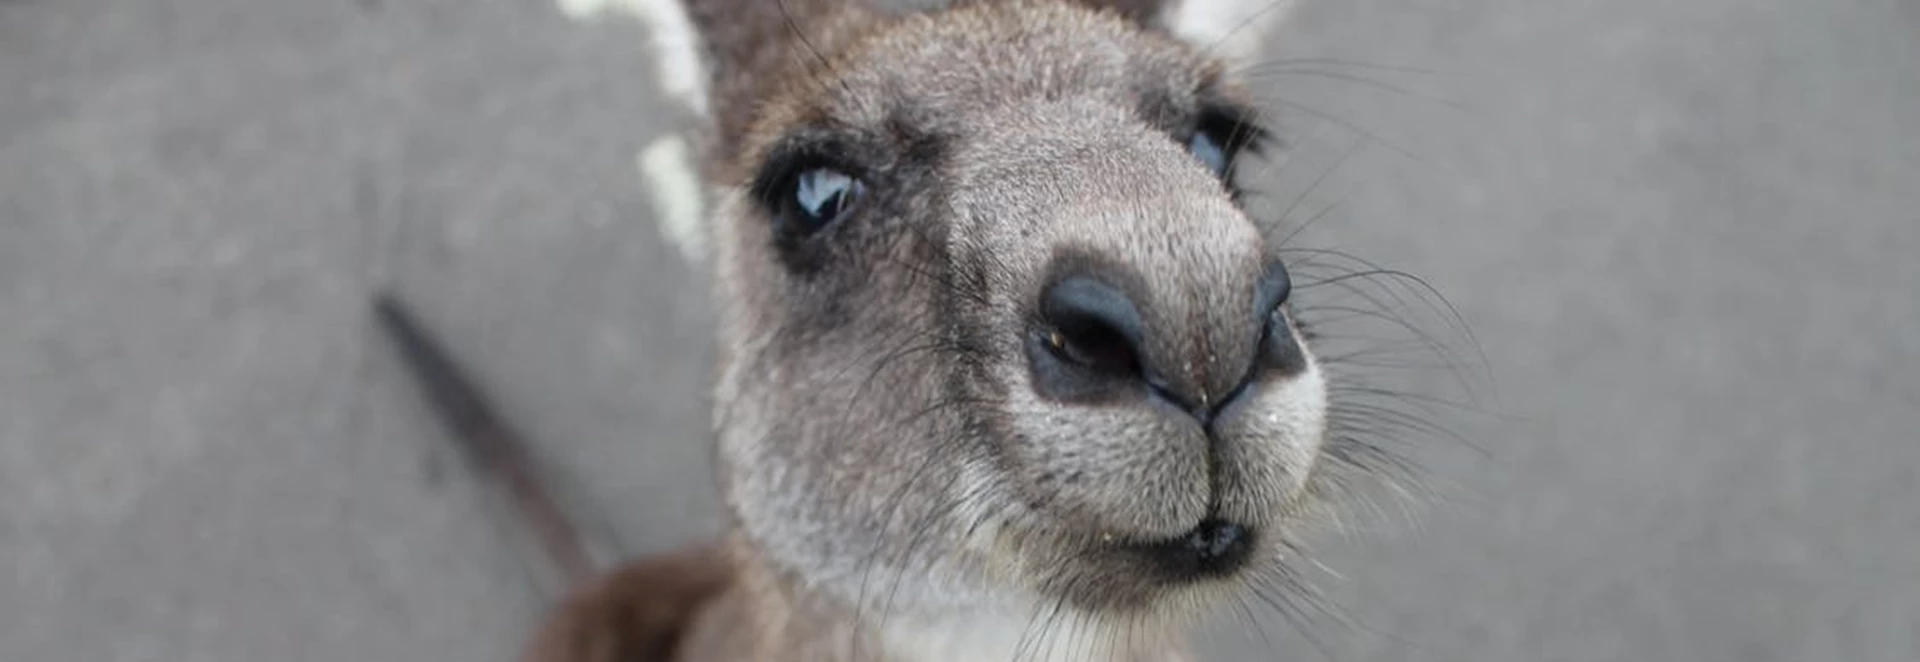 Volvo’s Autonomous Cars Confused by Kangaroos 